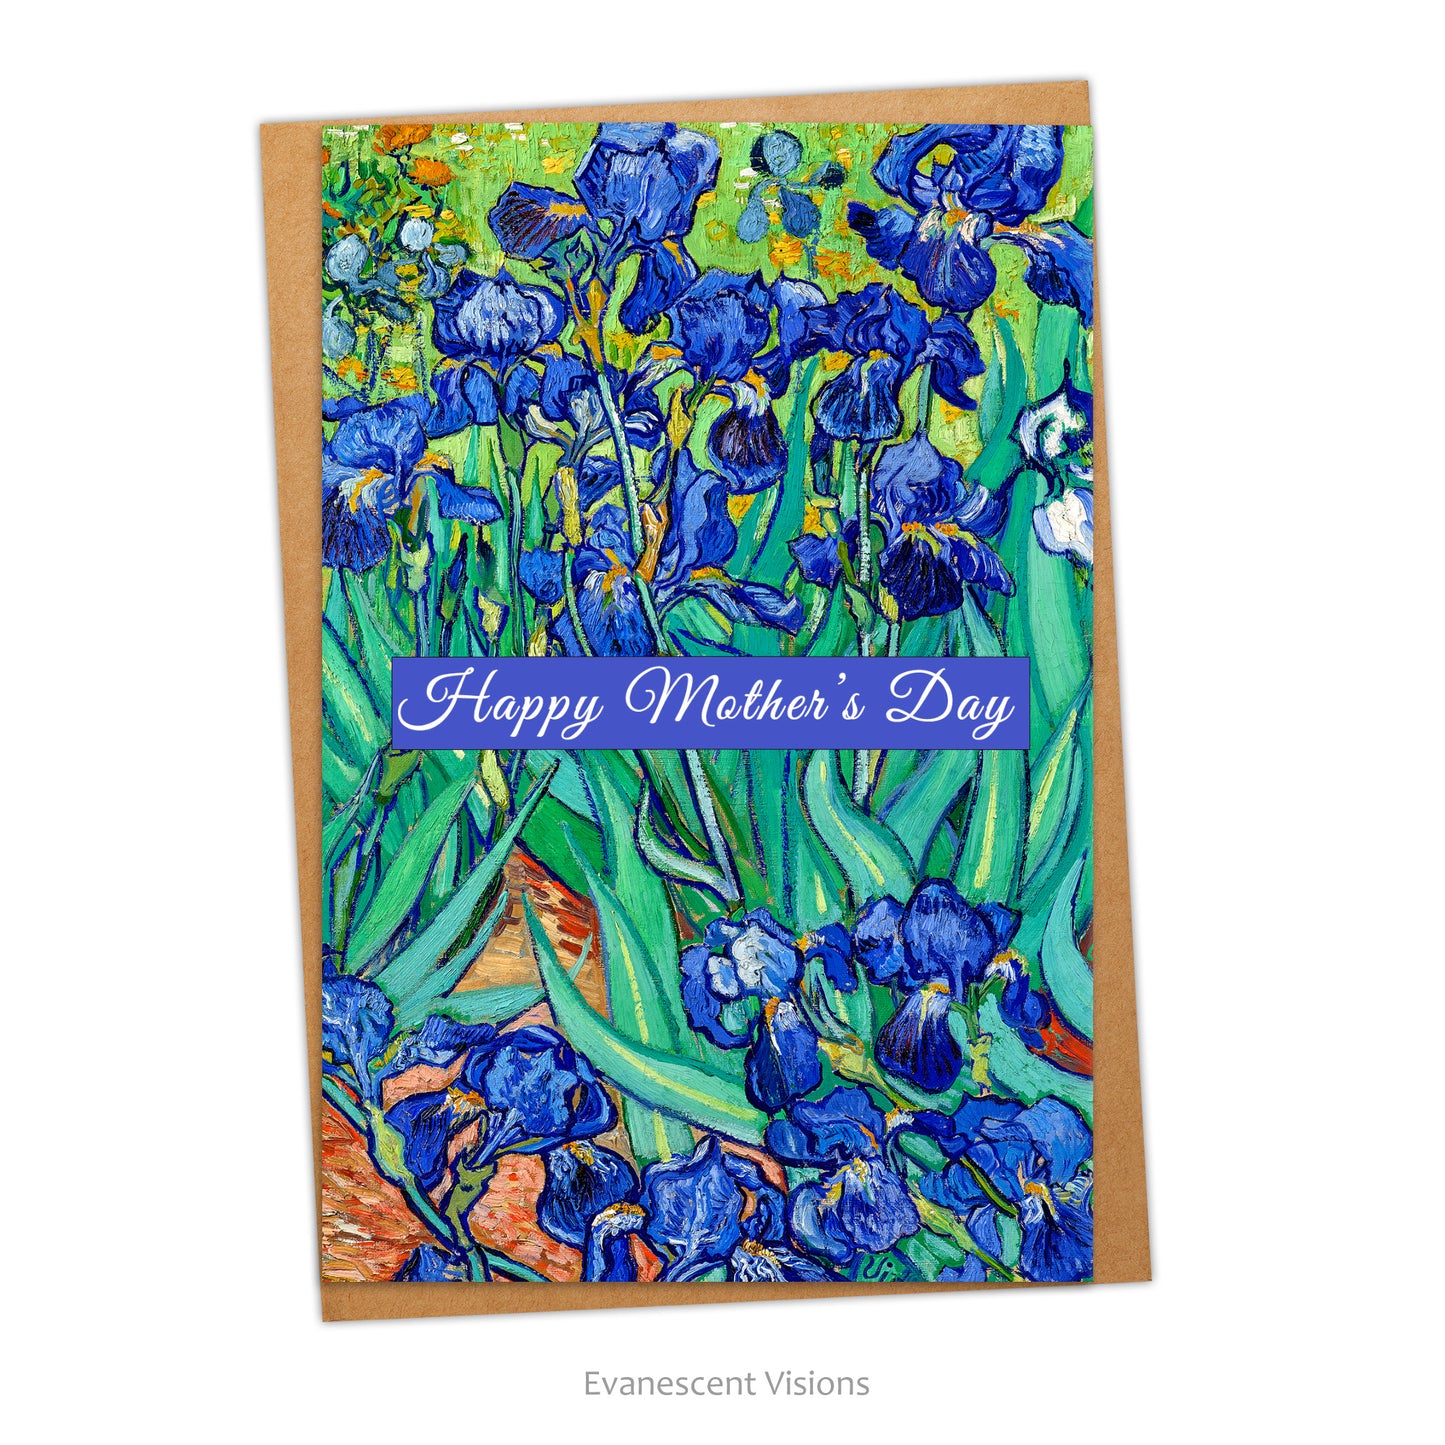 Card and envelope. Image on card is from Van Gogh's 'Irises.' 'Happy Mother's Day' is written in banner across card.